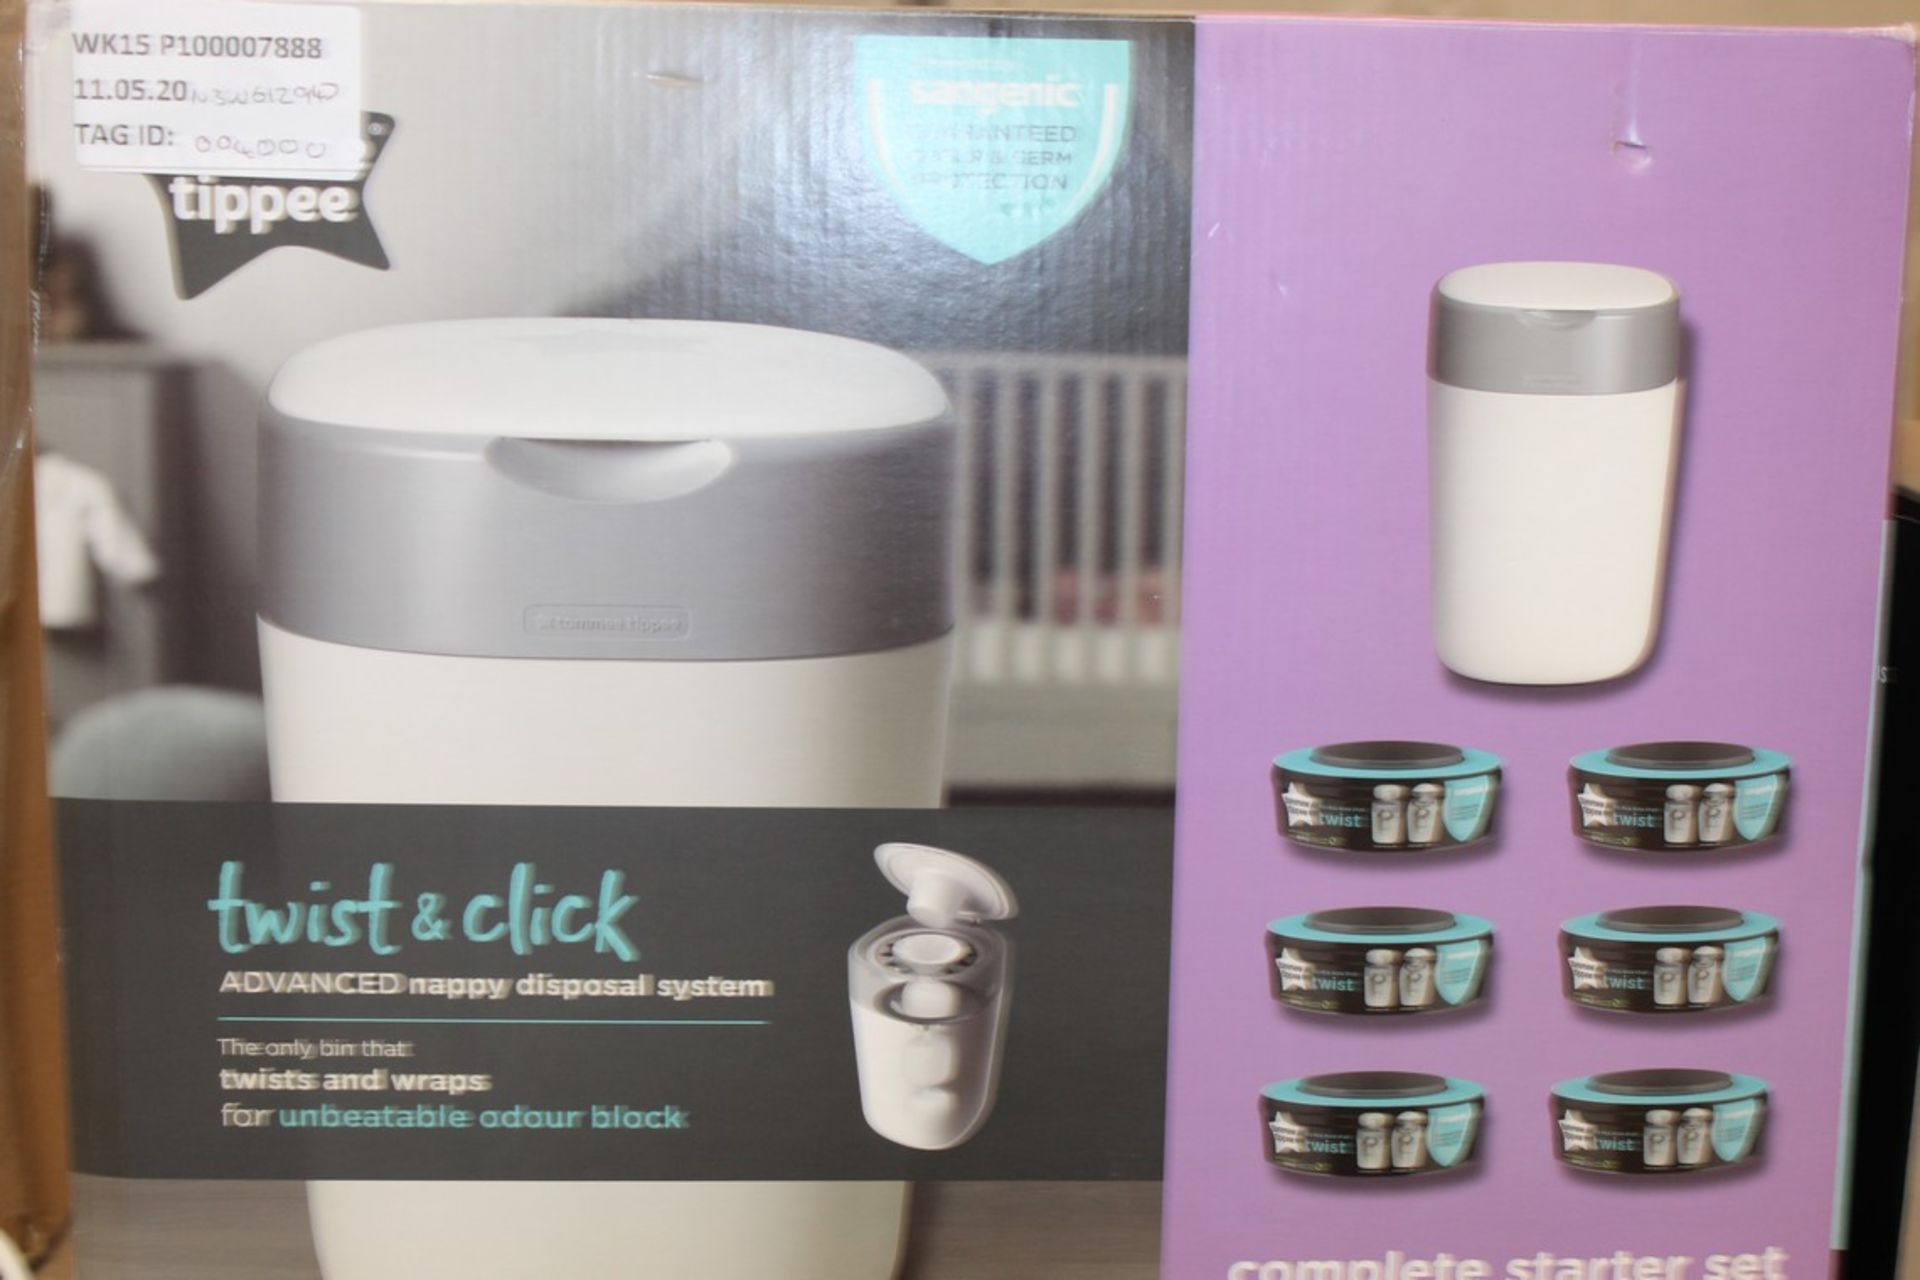 Boxed Tommee Tippee Twist & Click Advanced Nappy Disposable System RRP £40 (NBW612947) (Pictures Are